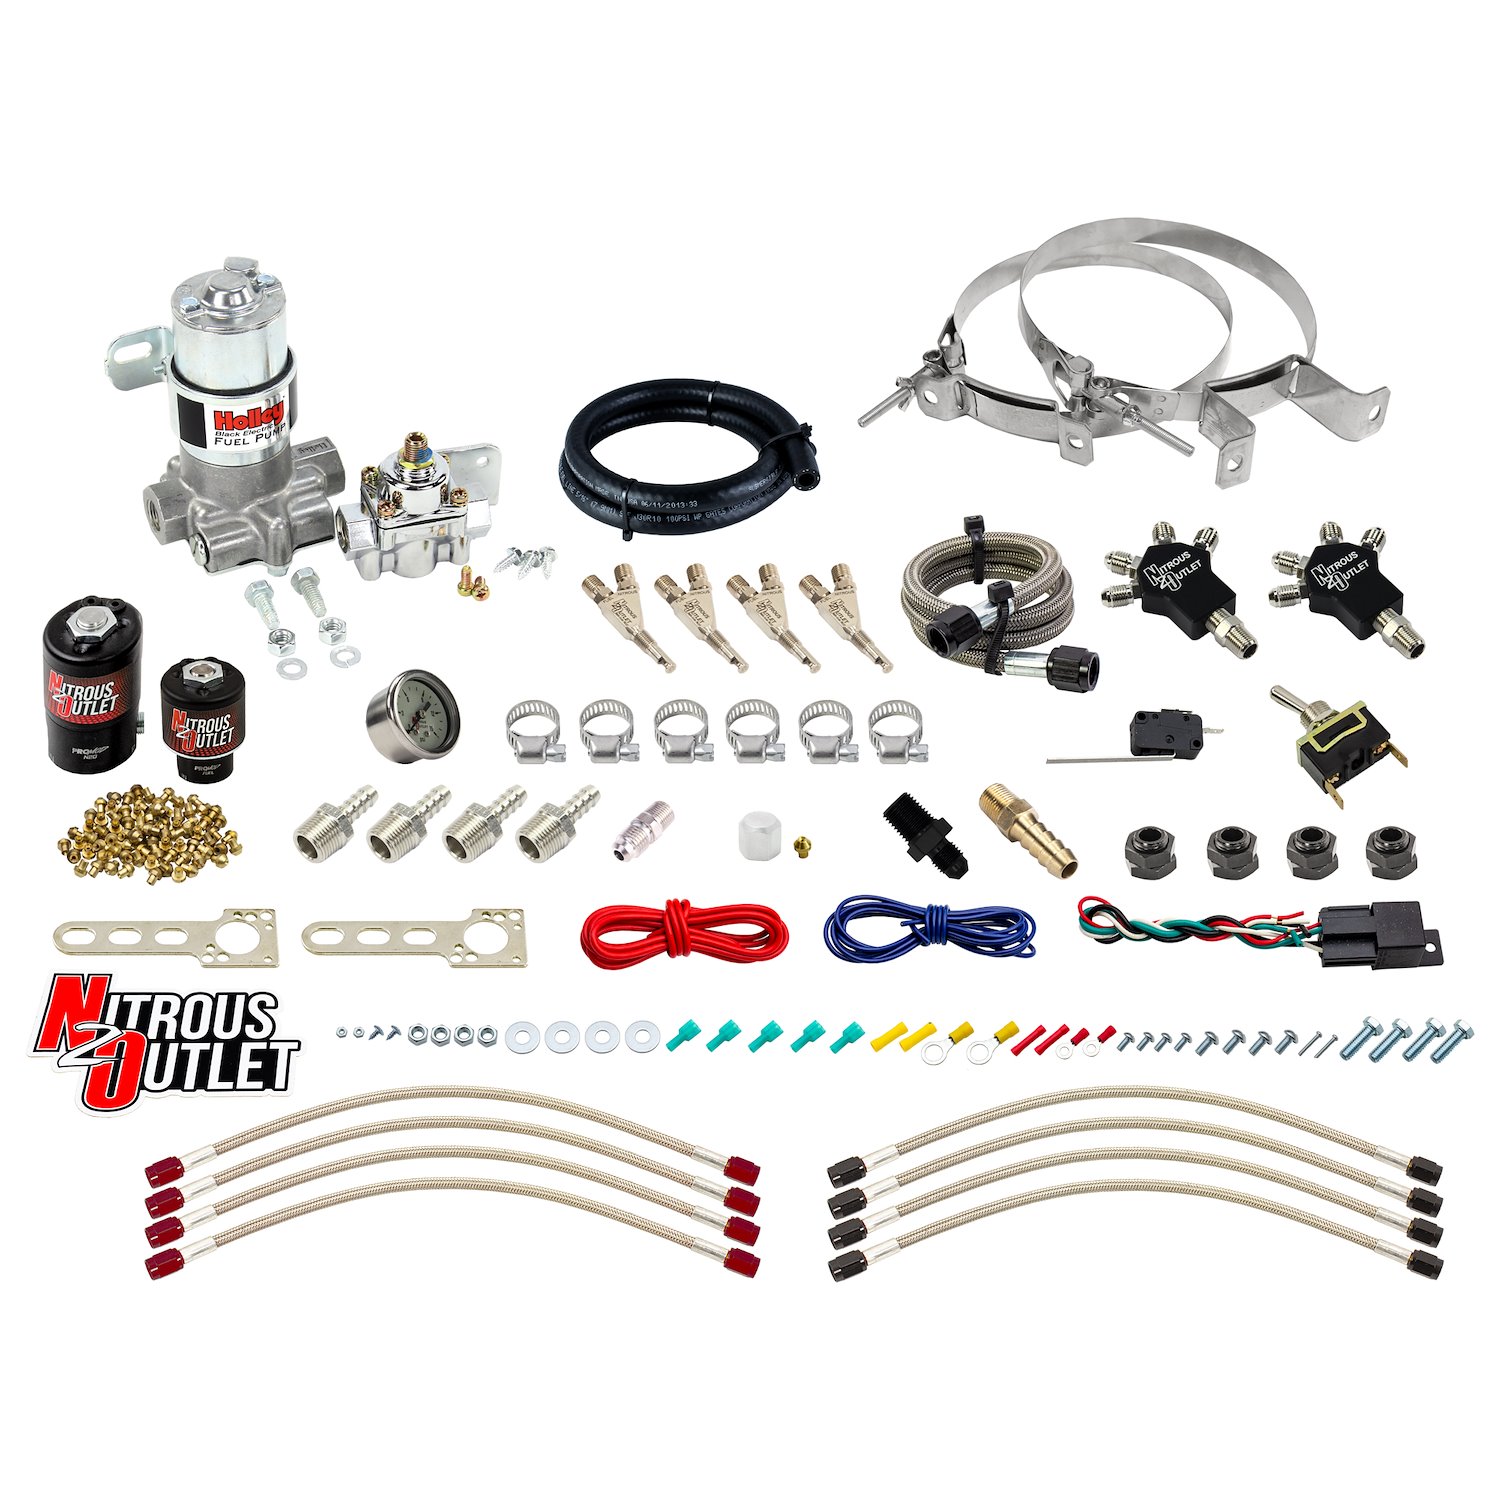 50-10200-00 Powersports 4-Cyl Pro Mod Nozzle System, Stainless 90-Degree Nozzles, Gas, 10 psi, No Bottle